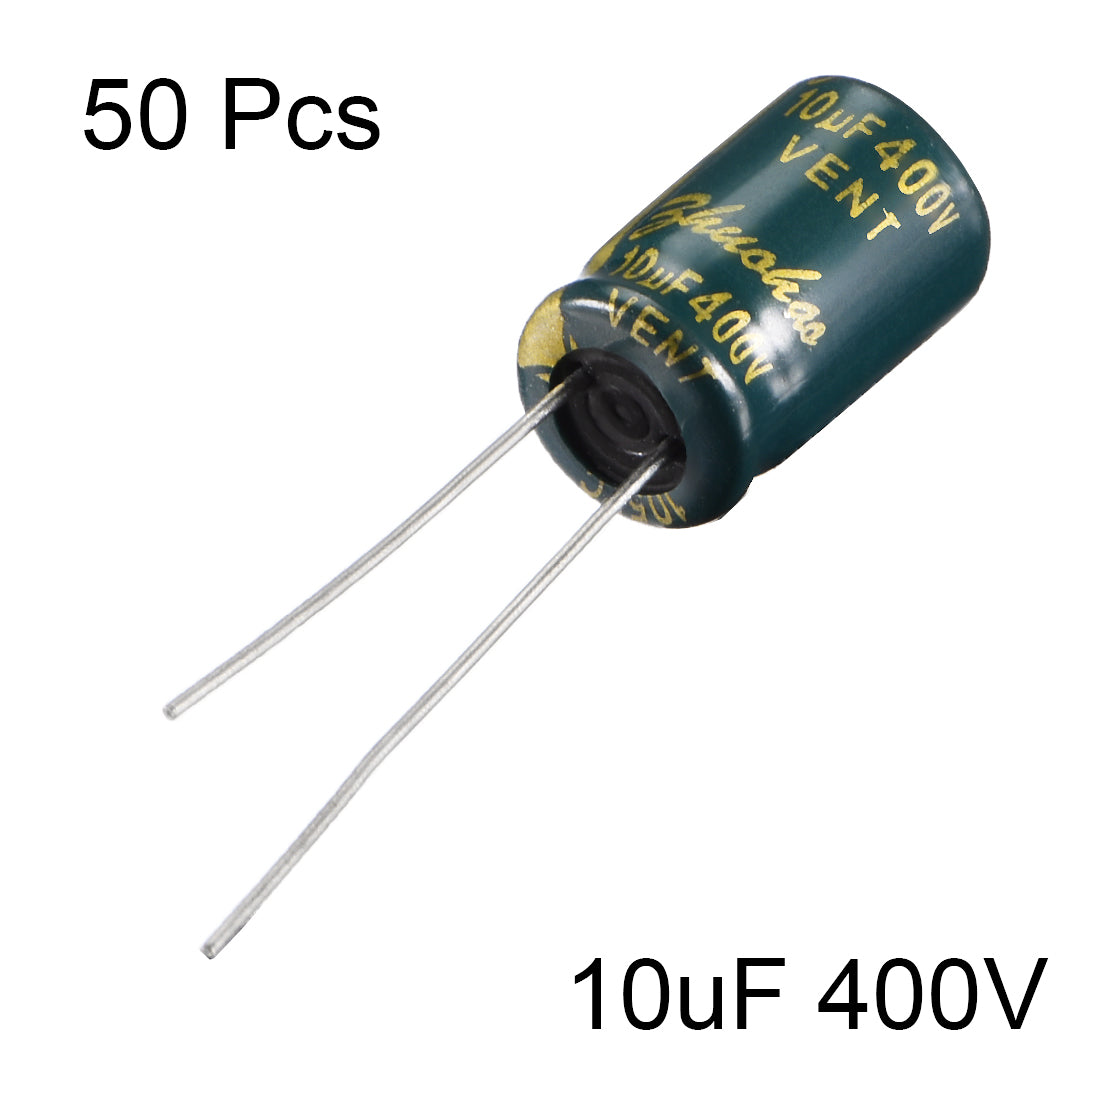 uxcell Uxcell Aluminum Radial Electrolytic Capacitor Low ESR Green with 10uF 400V 105 Celsius Life 3000H 8 x 12mm High Ripple Current,Low Impedance 50pcs